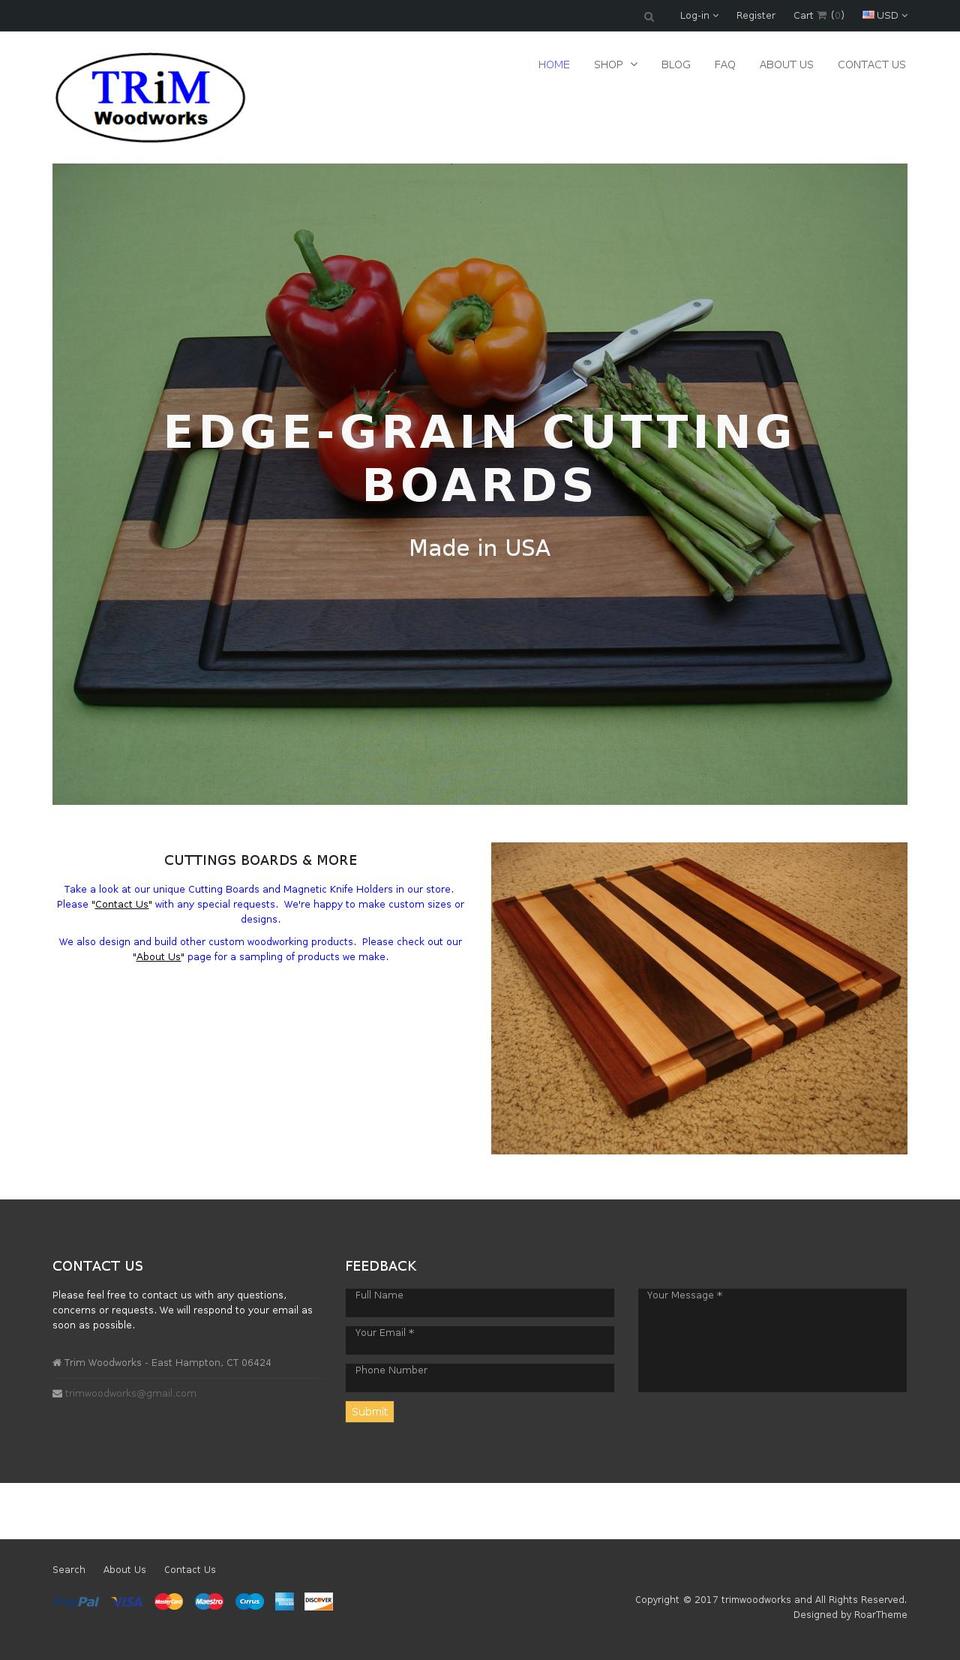 QUEEN Shopify theme site example trimwoodworks.com